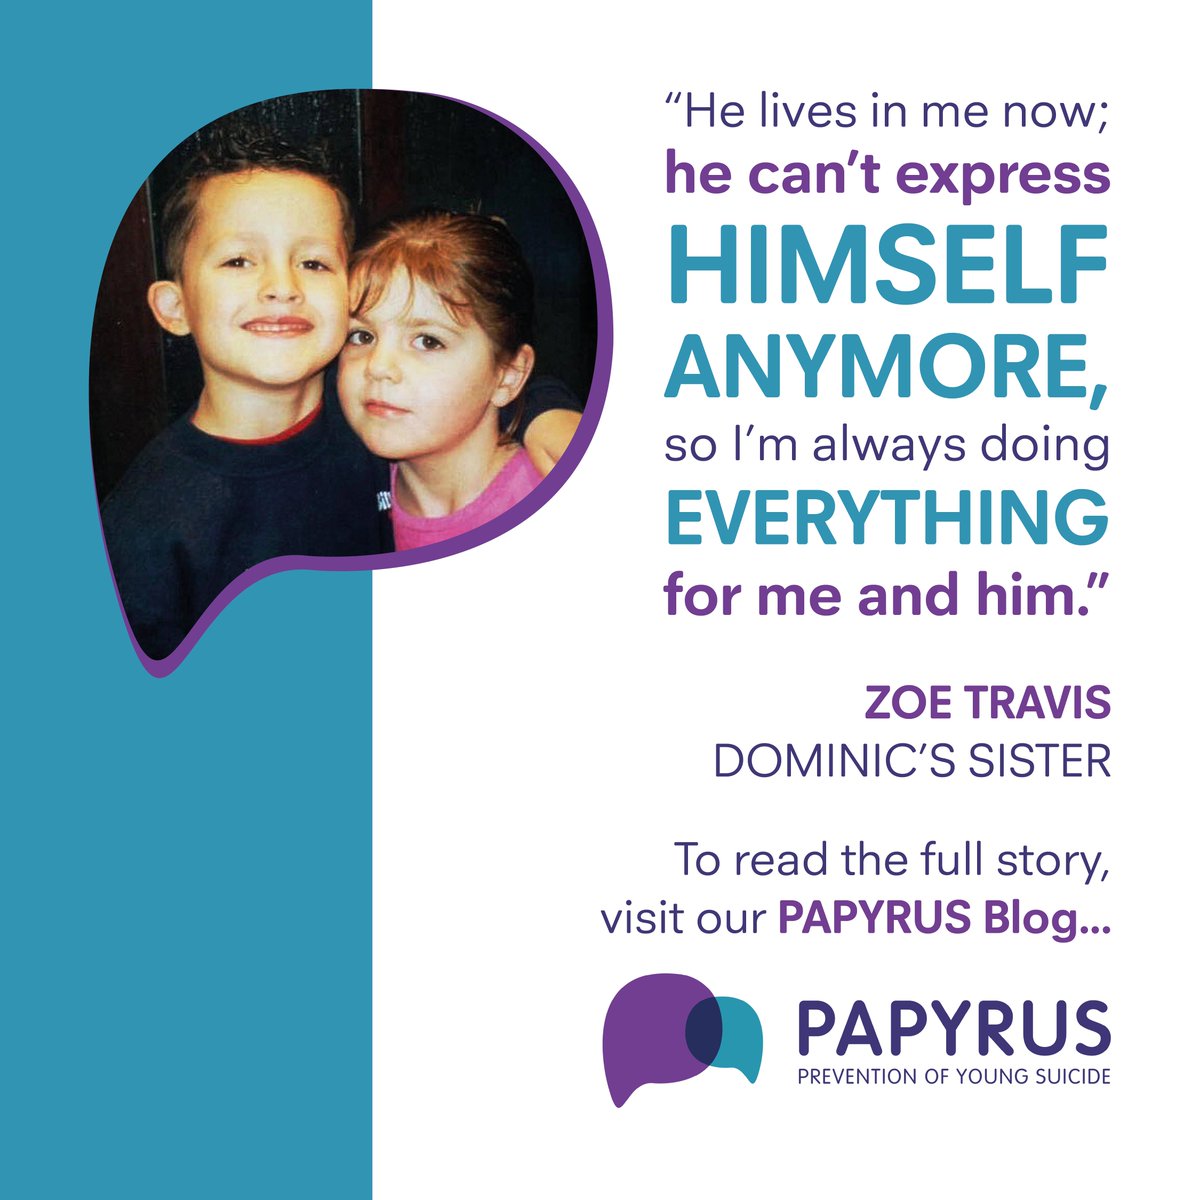 'I still feel like I’ve lost the other half of me & my heart is still shattered. But by doing this, I know he'd be proud of me.'💜 In our latest blog, Zoe talks about her brother Dominic and her commitment to keeping his memory alive. Read more here: ow.ly/62Lp50Nee9I